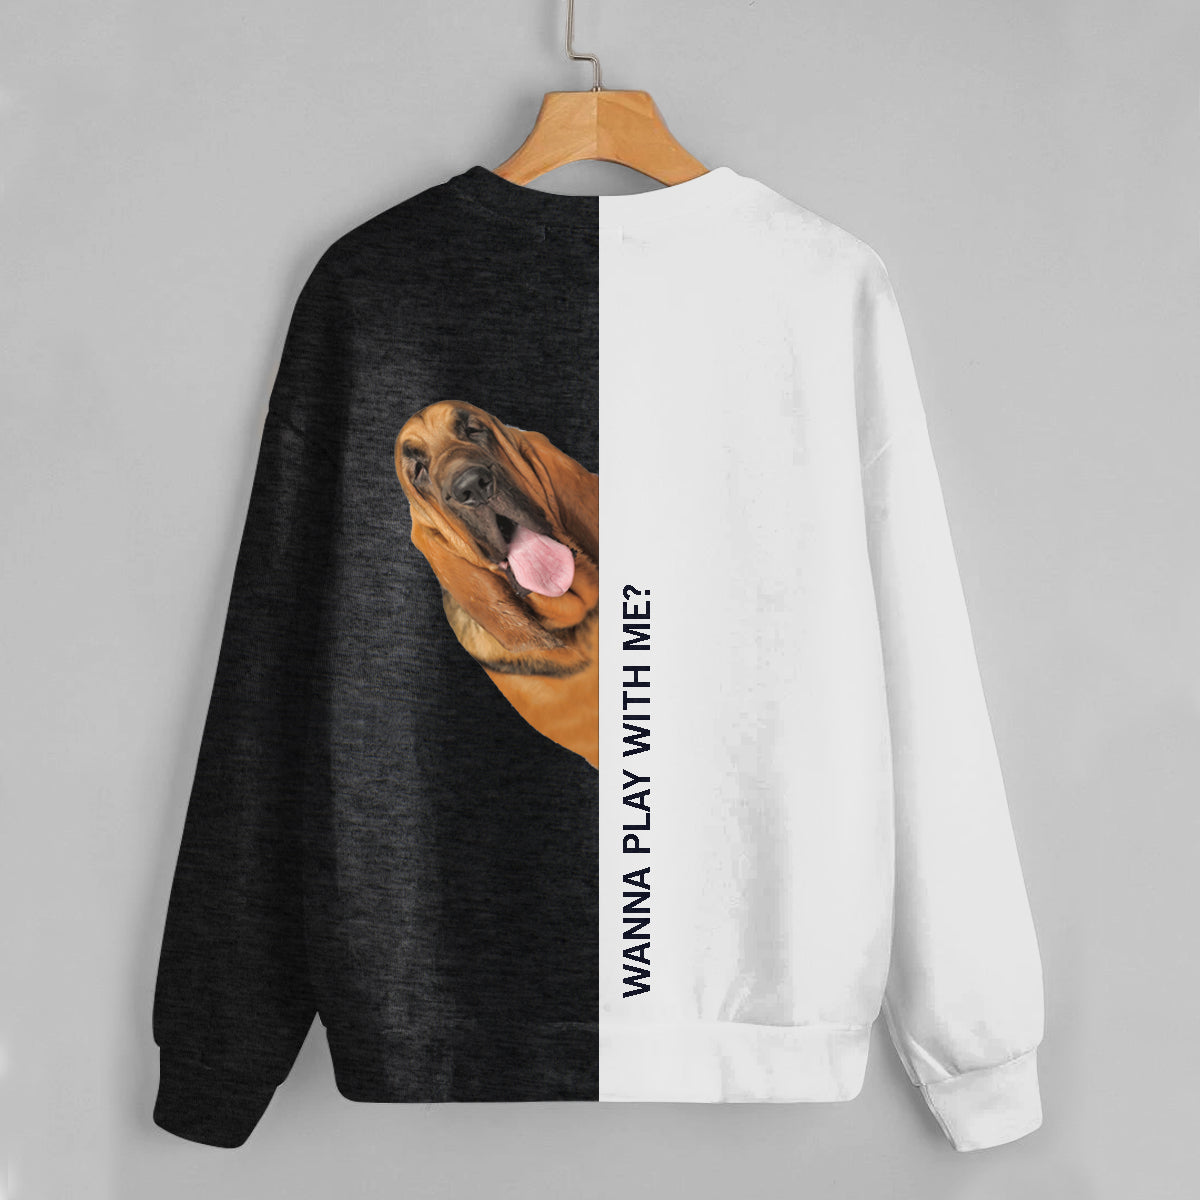 Funny Happy Time - Sweat-shirt Bloodhound V1